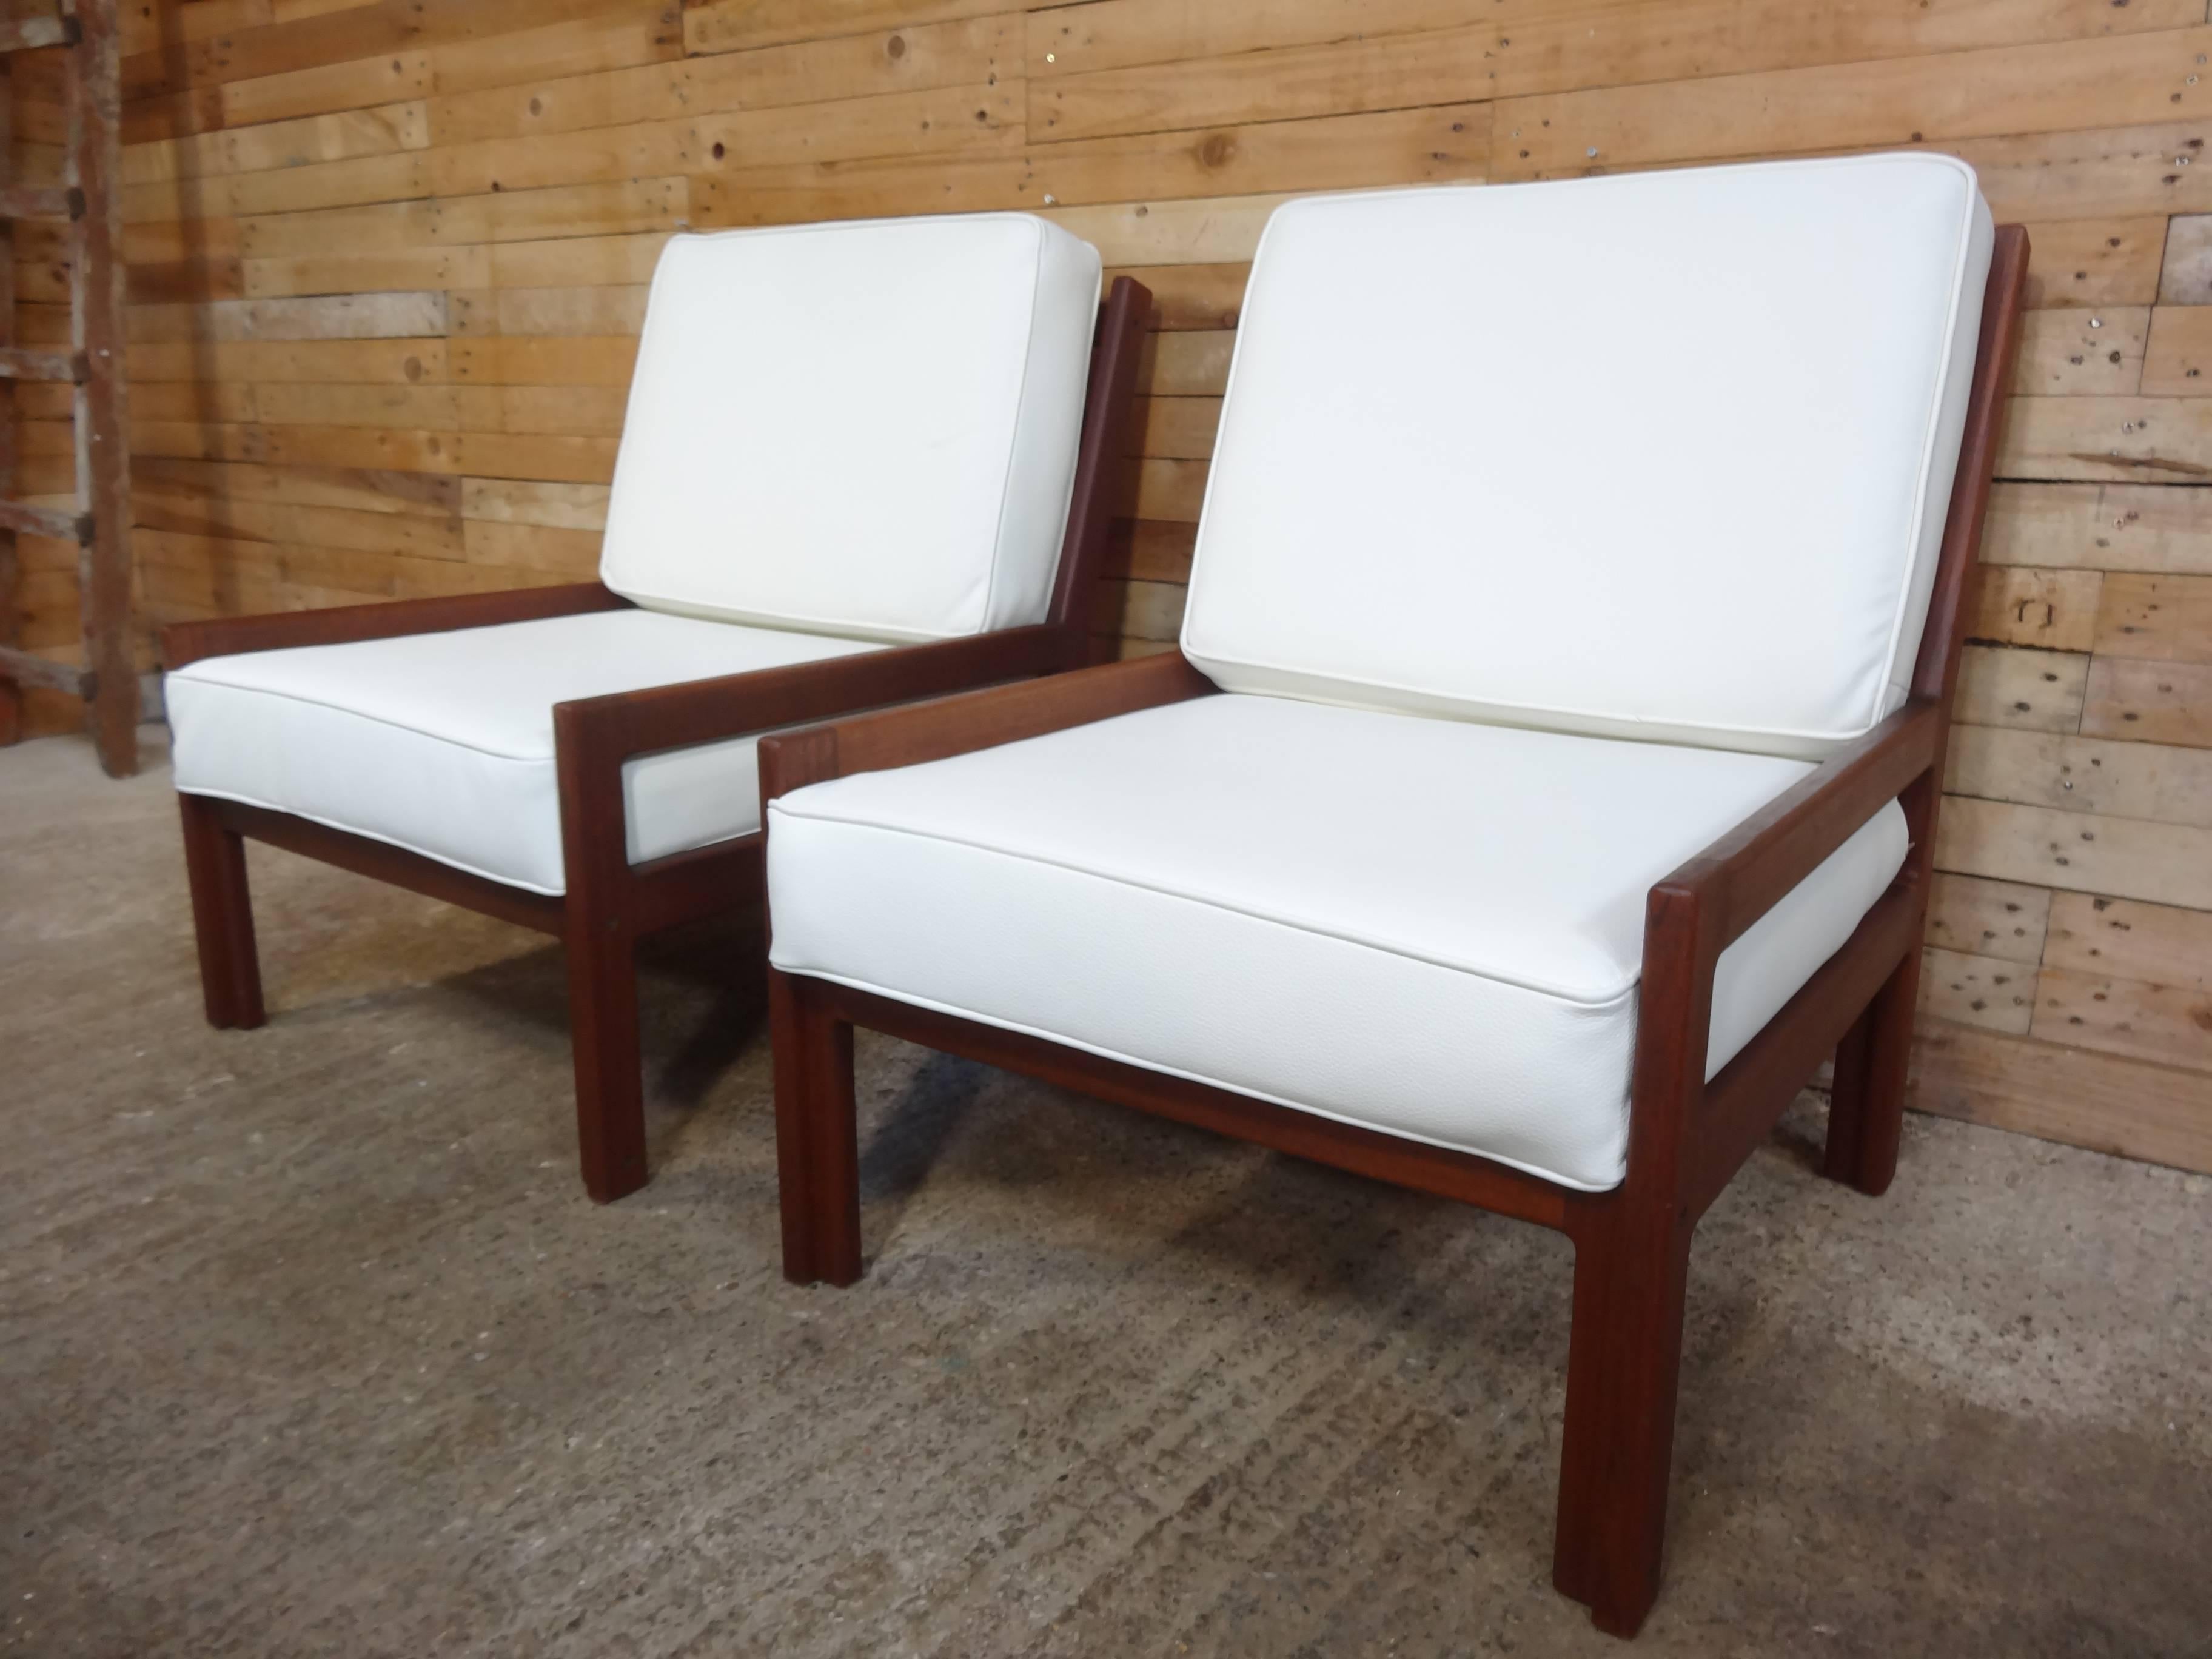 Lovely chairs newly upholstered in white Italian leather, clean minimal 1960s lines make for that Classic retro look. Lovely set of two of these minimalistic lounge chairs frame and leather are in very good vintage condition!
Measures:
Seat height